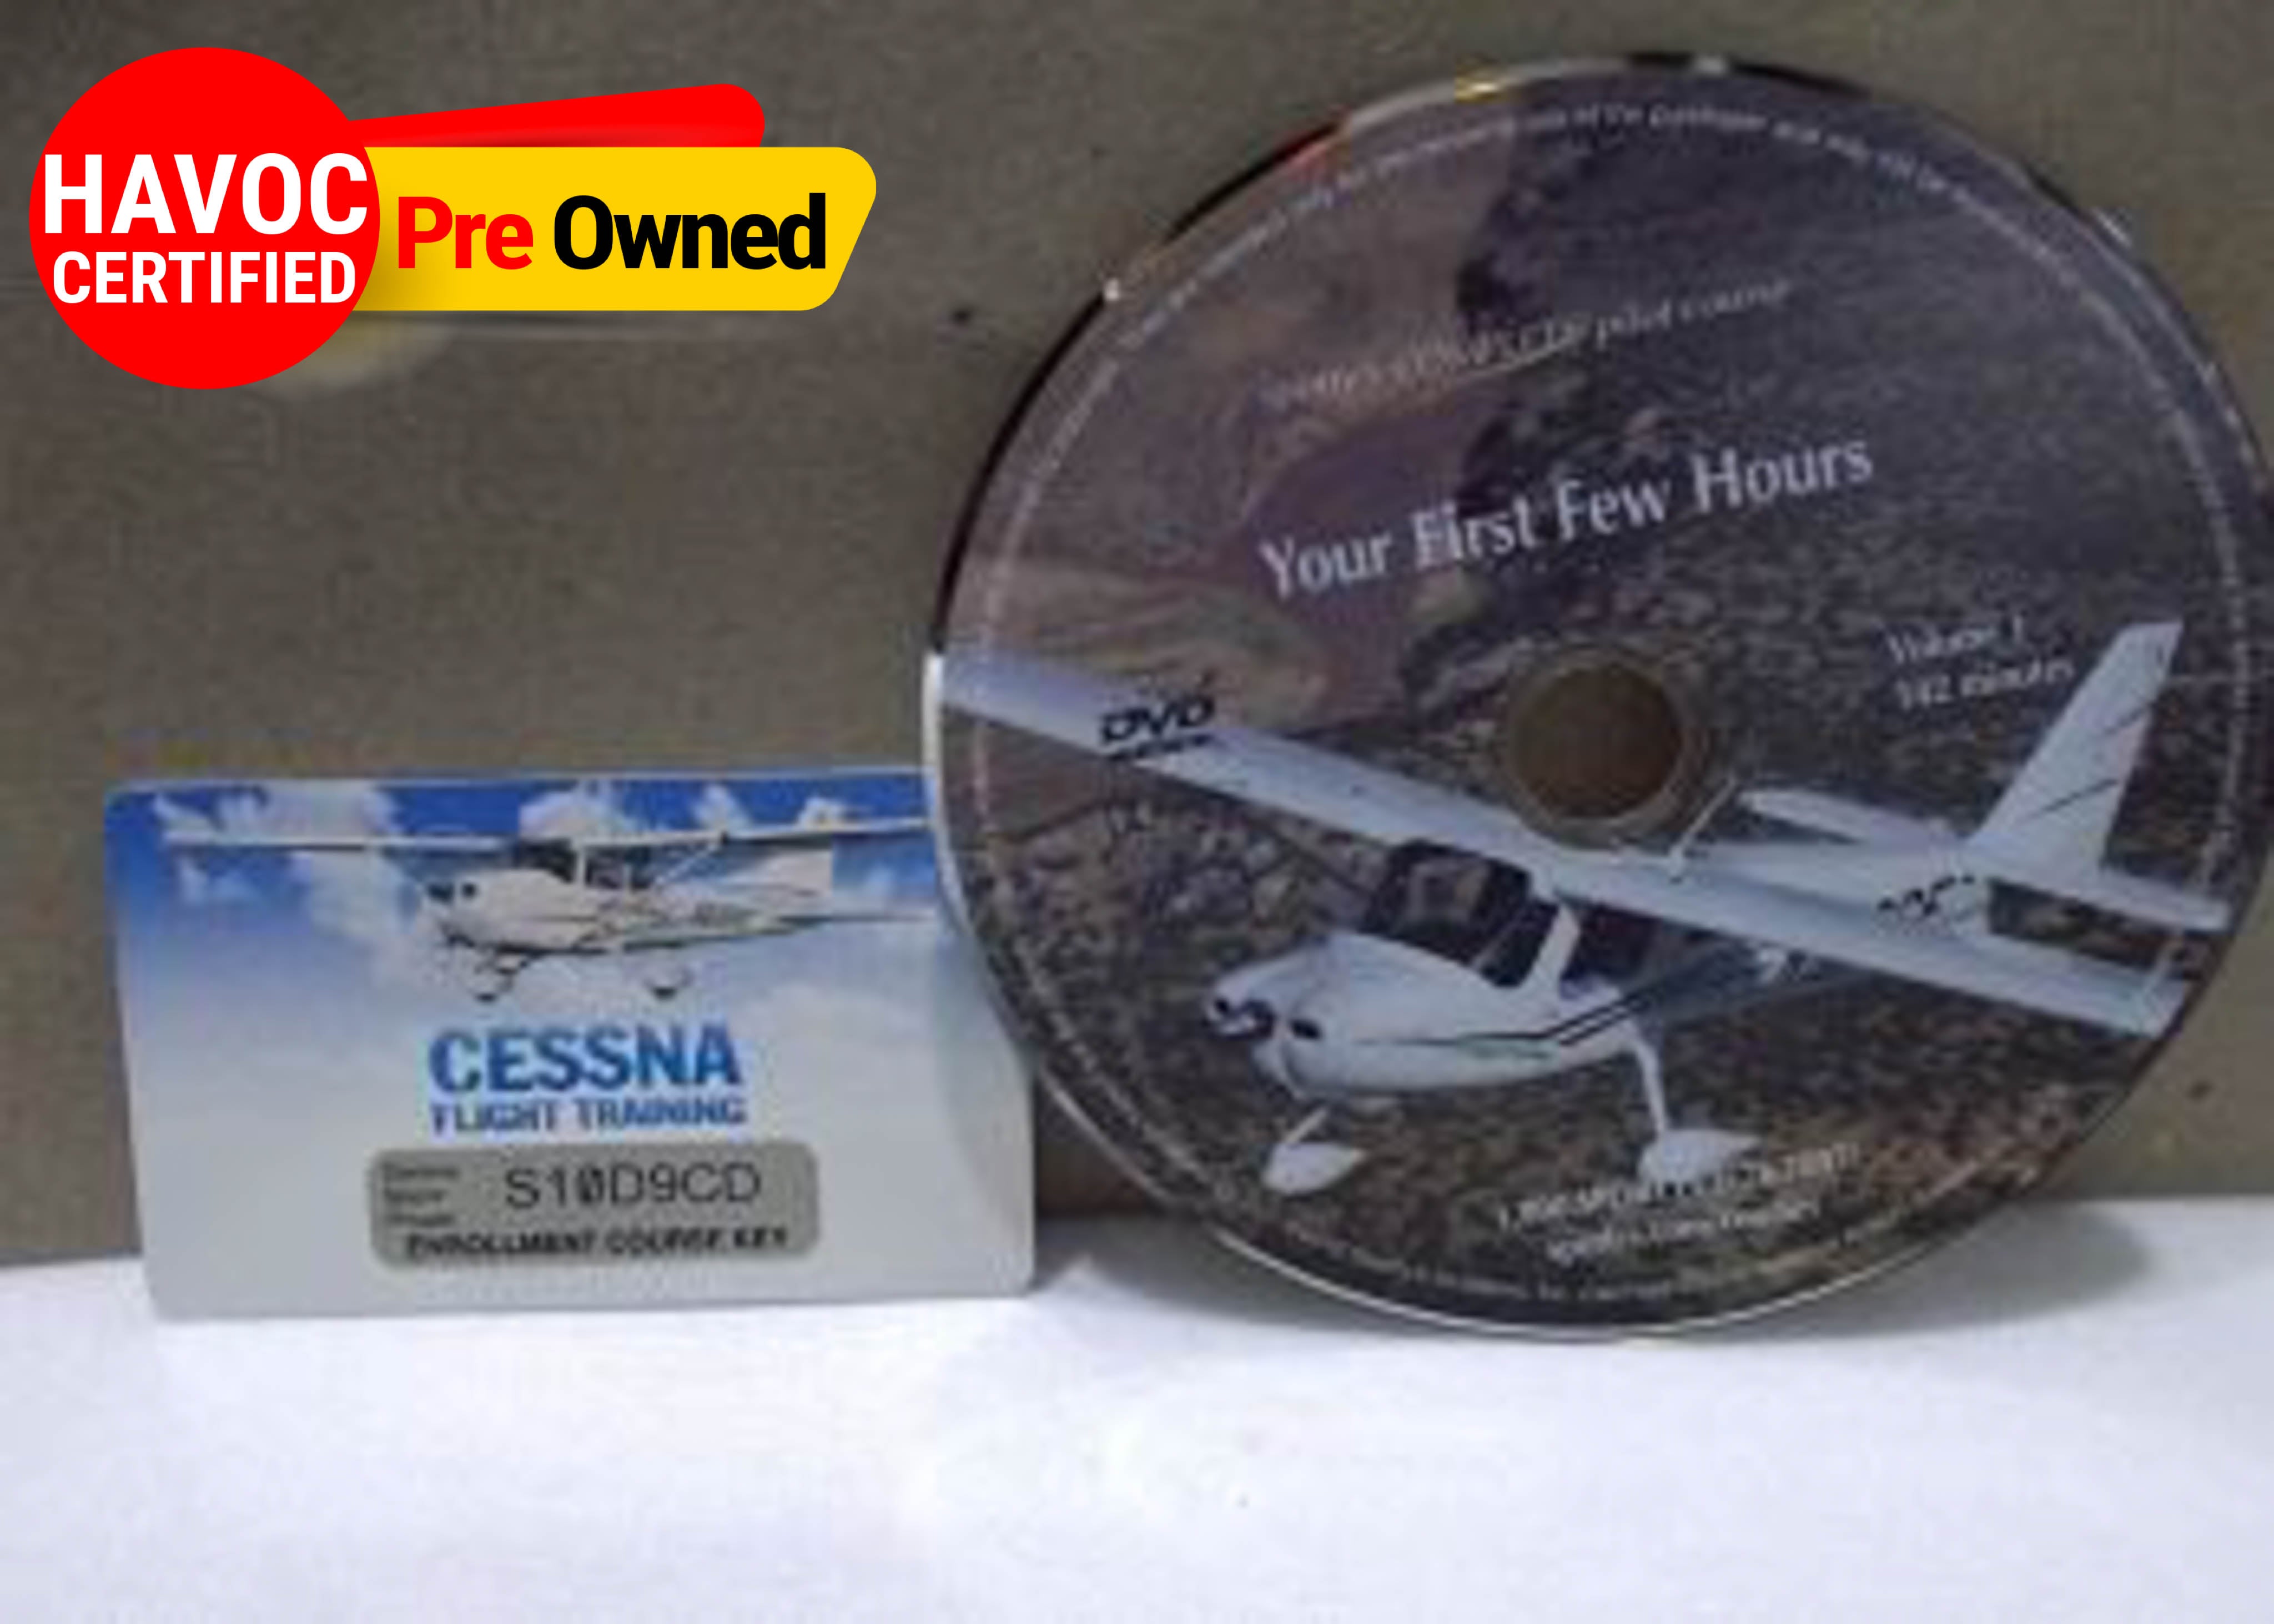 FLIGHT TRAINING COURSE DVD(QUALITY PRE OWNED)